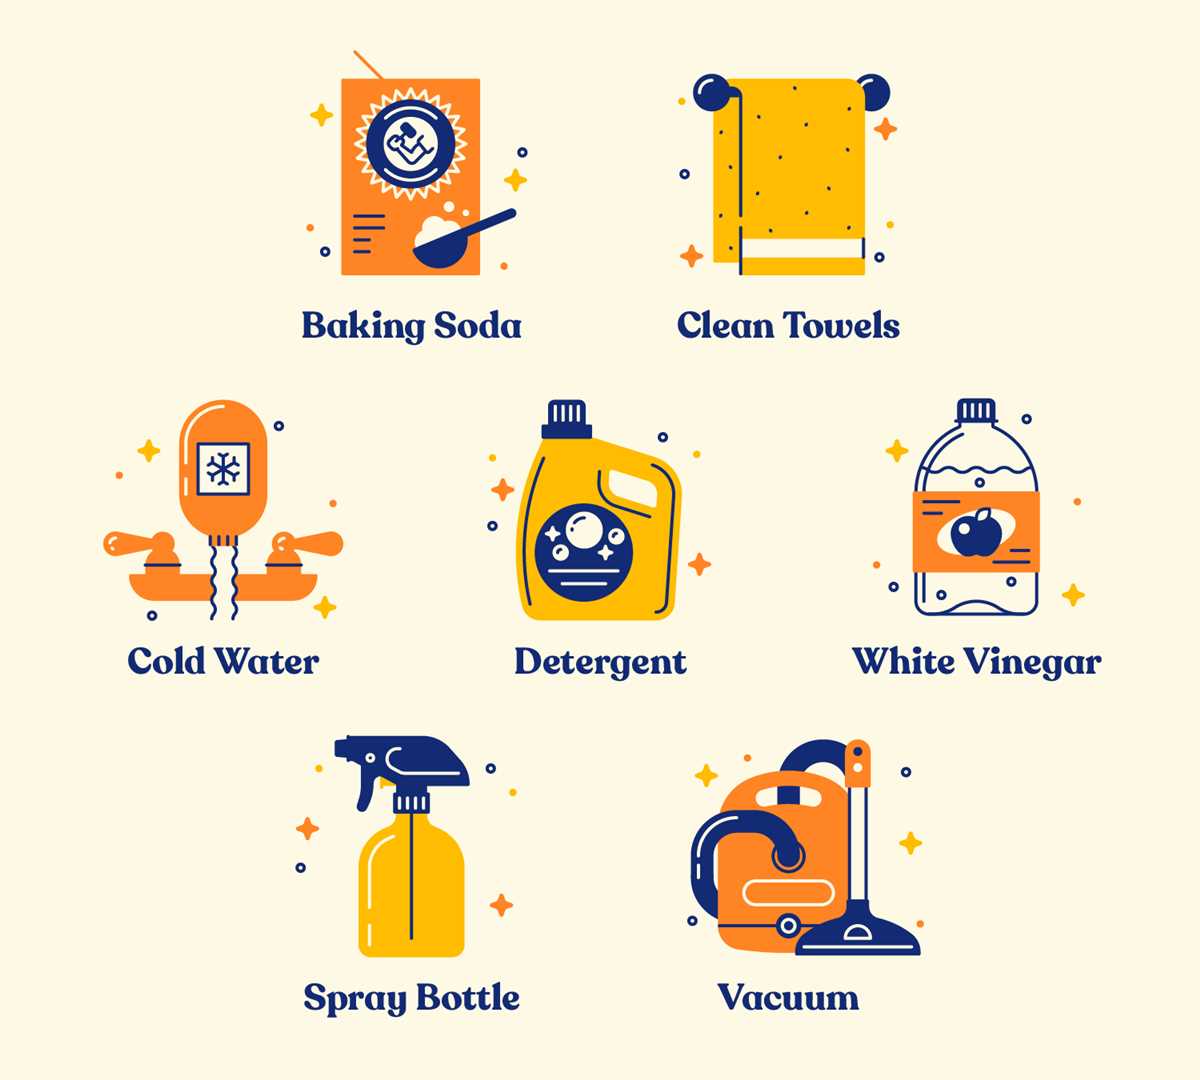 Common Types of Stains